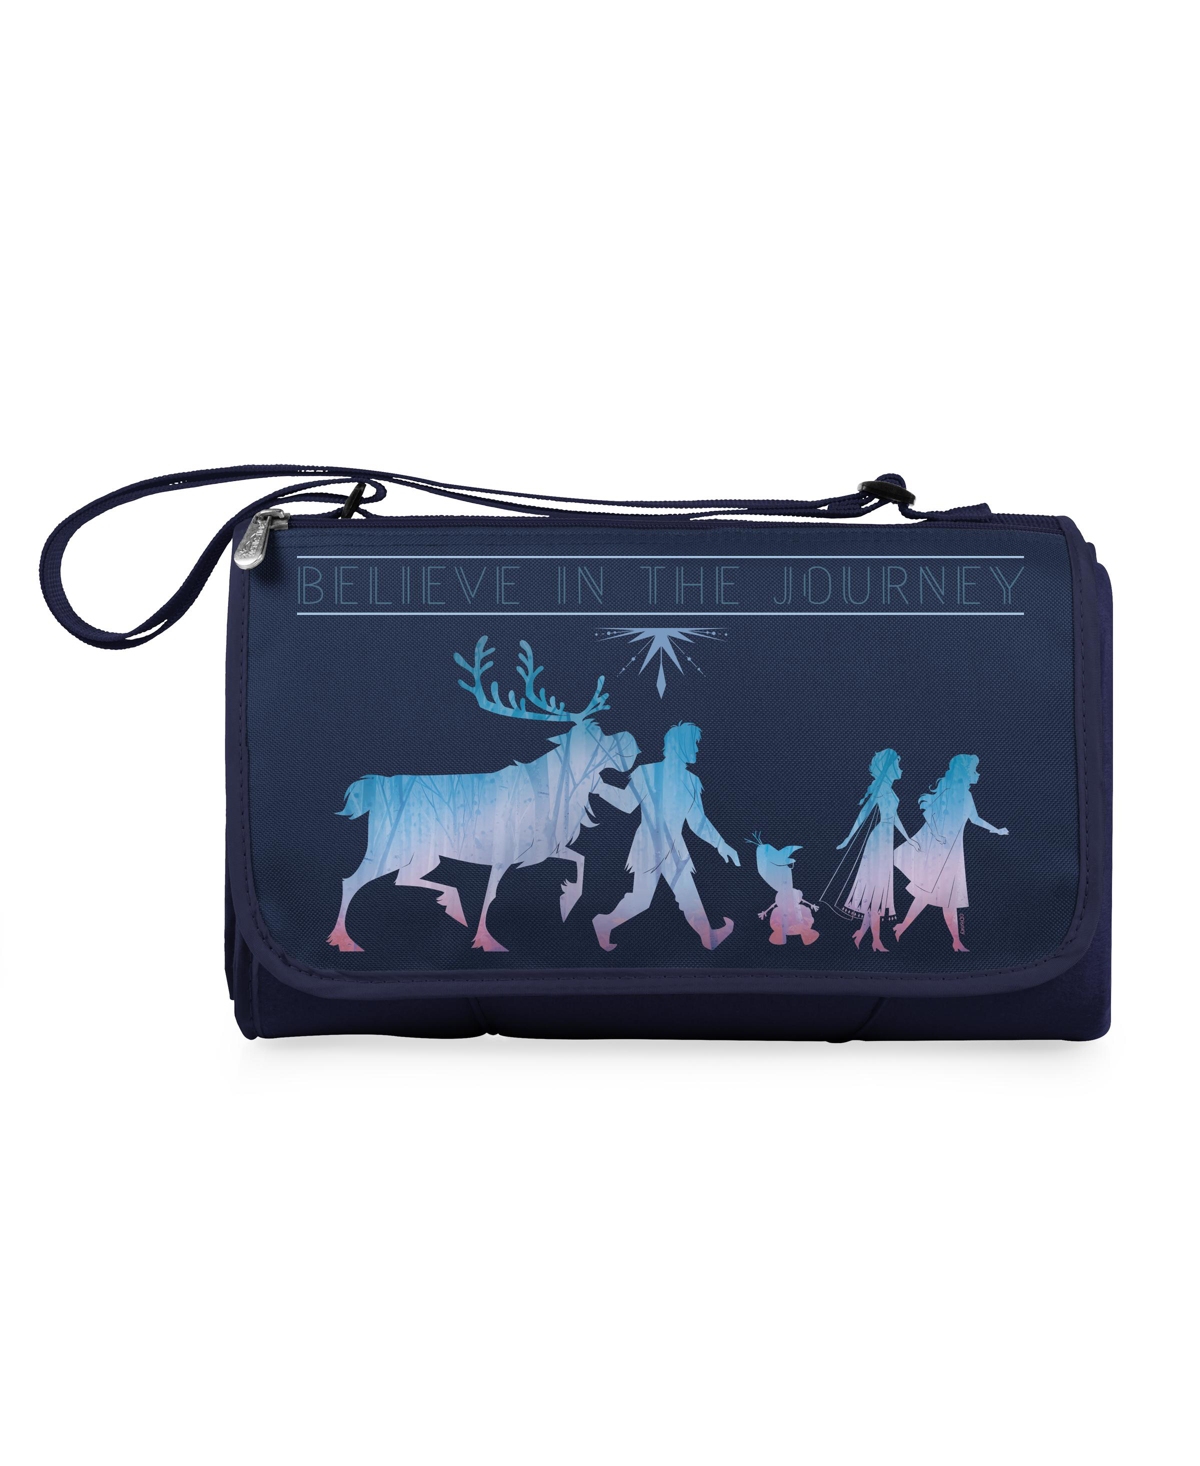 Oniva by Picnic Time Disney's Frozen 2 Outdoor Picnic Blanket Tote - Navy Blue